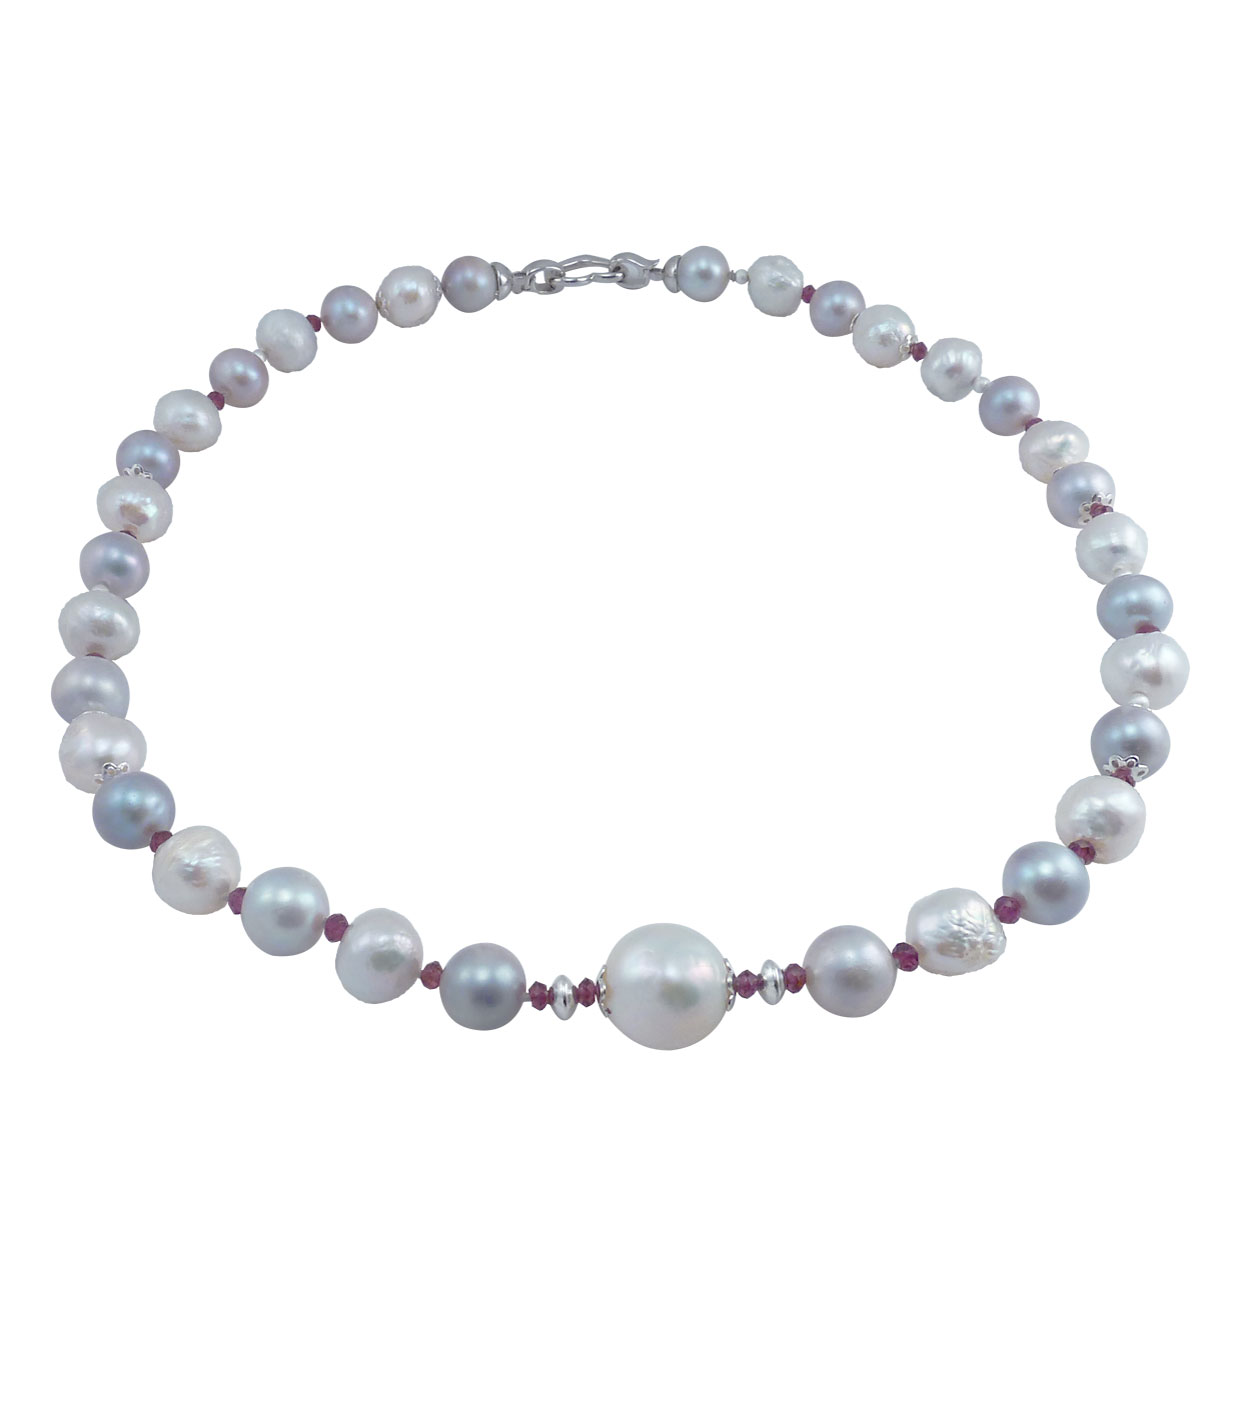 Designer pearl necklace grey and white pearls. Modern pearl jewelry